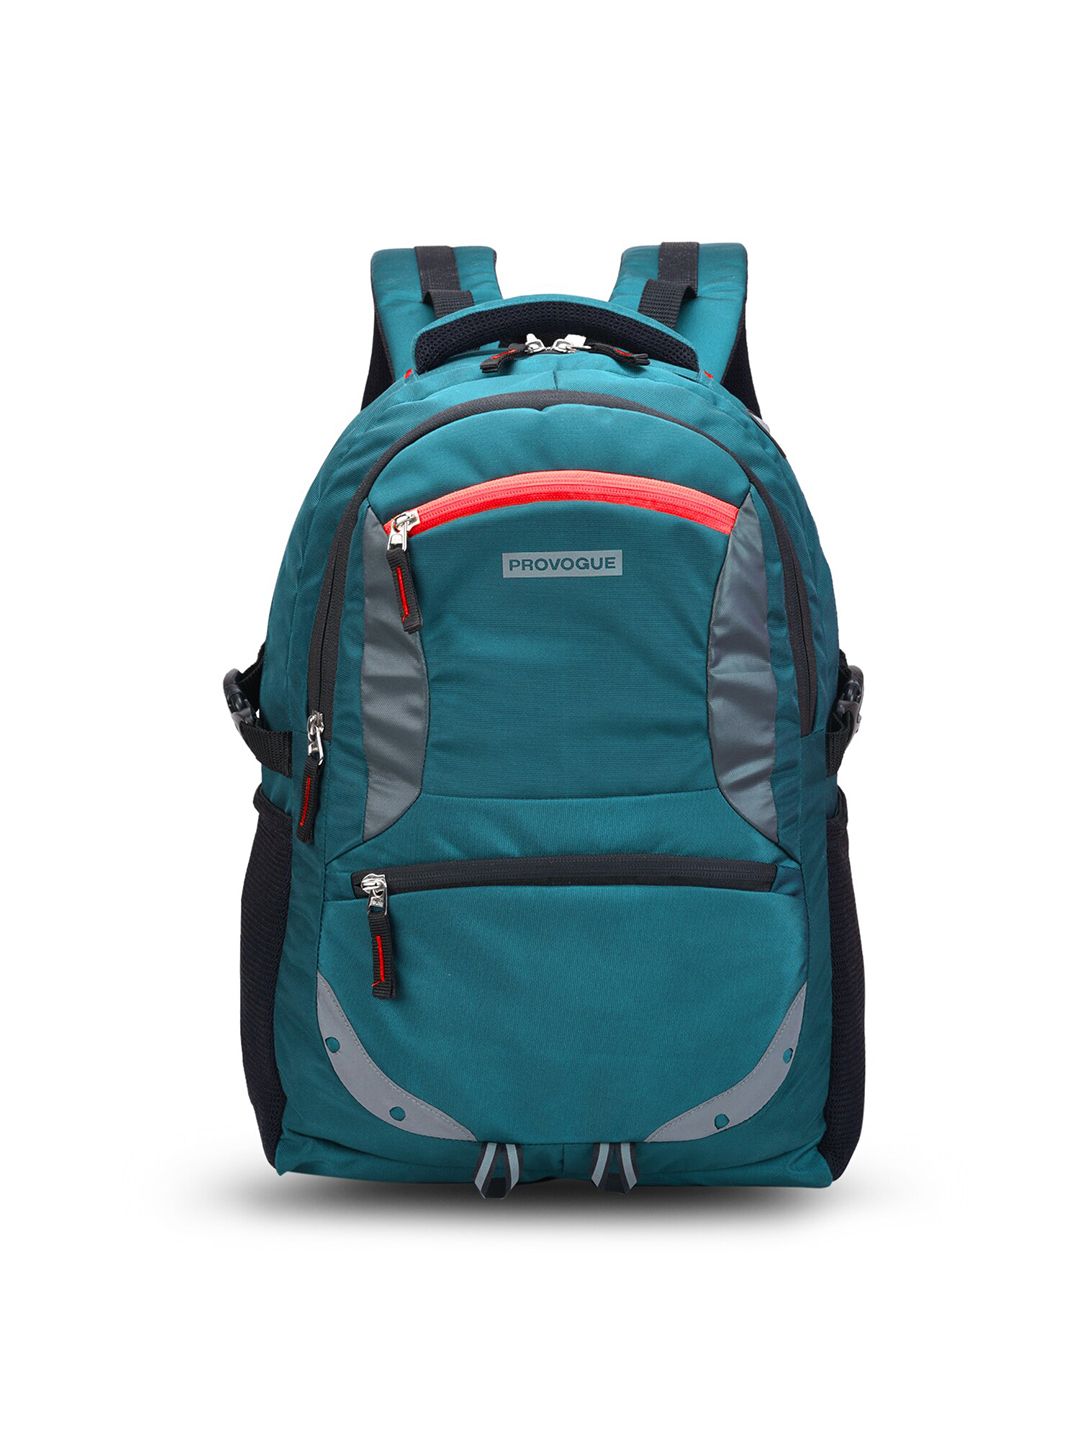 Provogue Unisex Sea Green & Black Backpack with Rain Cover Price in India